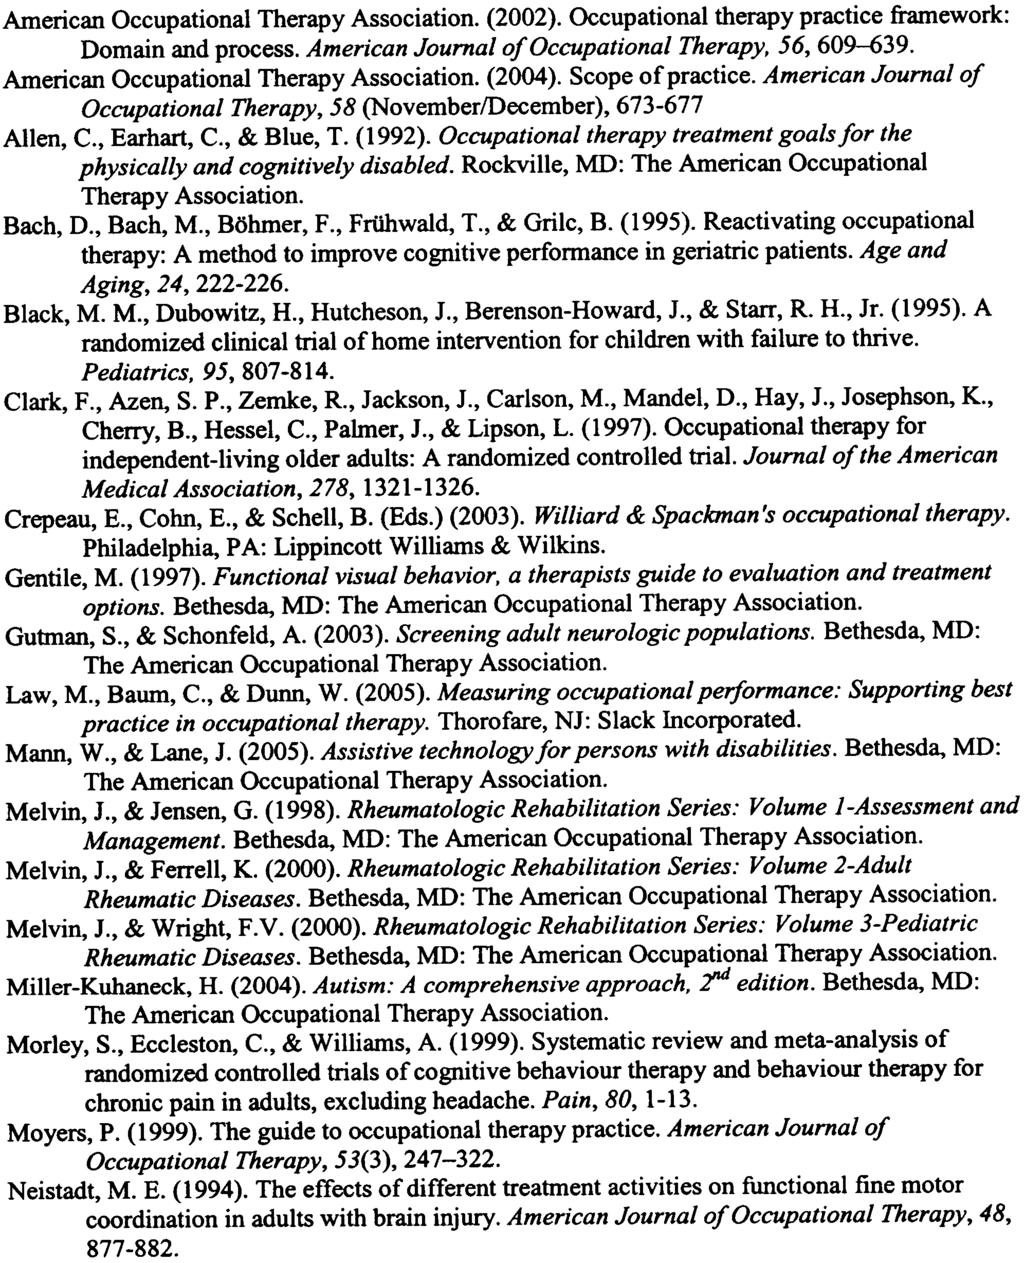 Suggested reference list illuminating the scope of Occupational Therapy American Occupational Therapy Association. (2002). Occupational therapy practice framework: Domain and process.